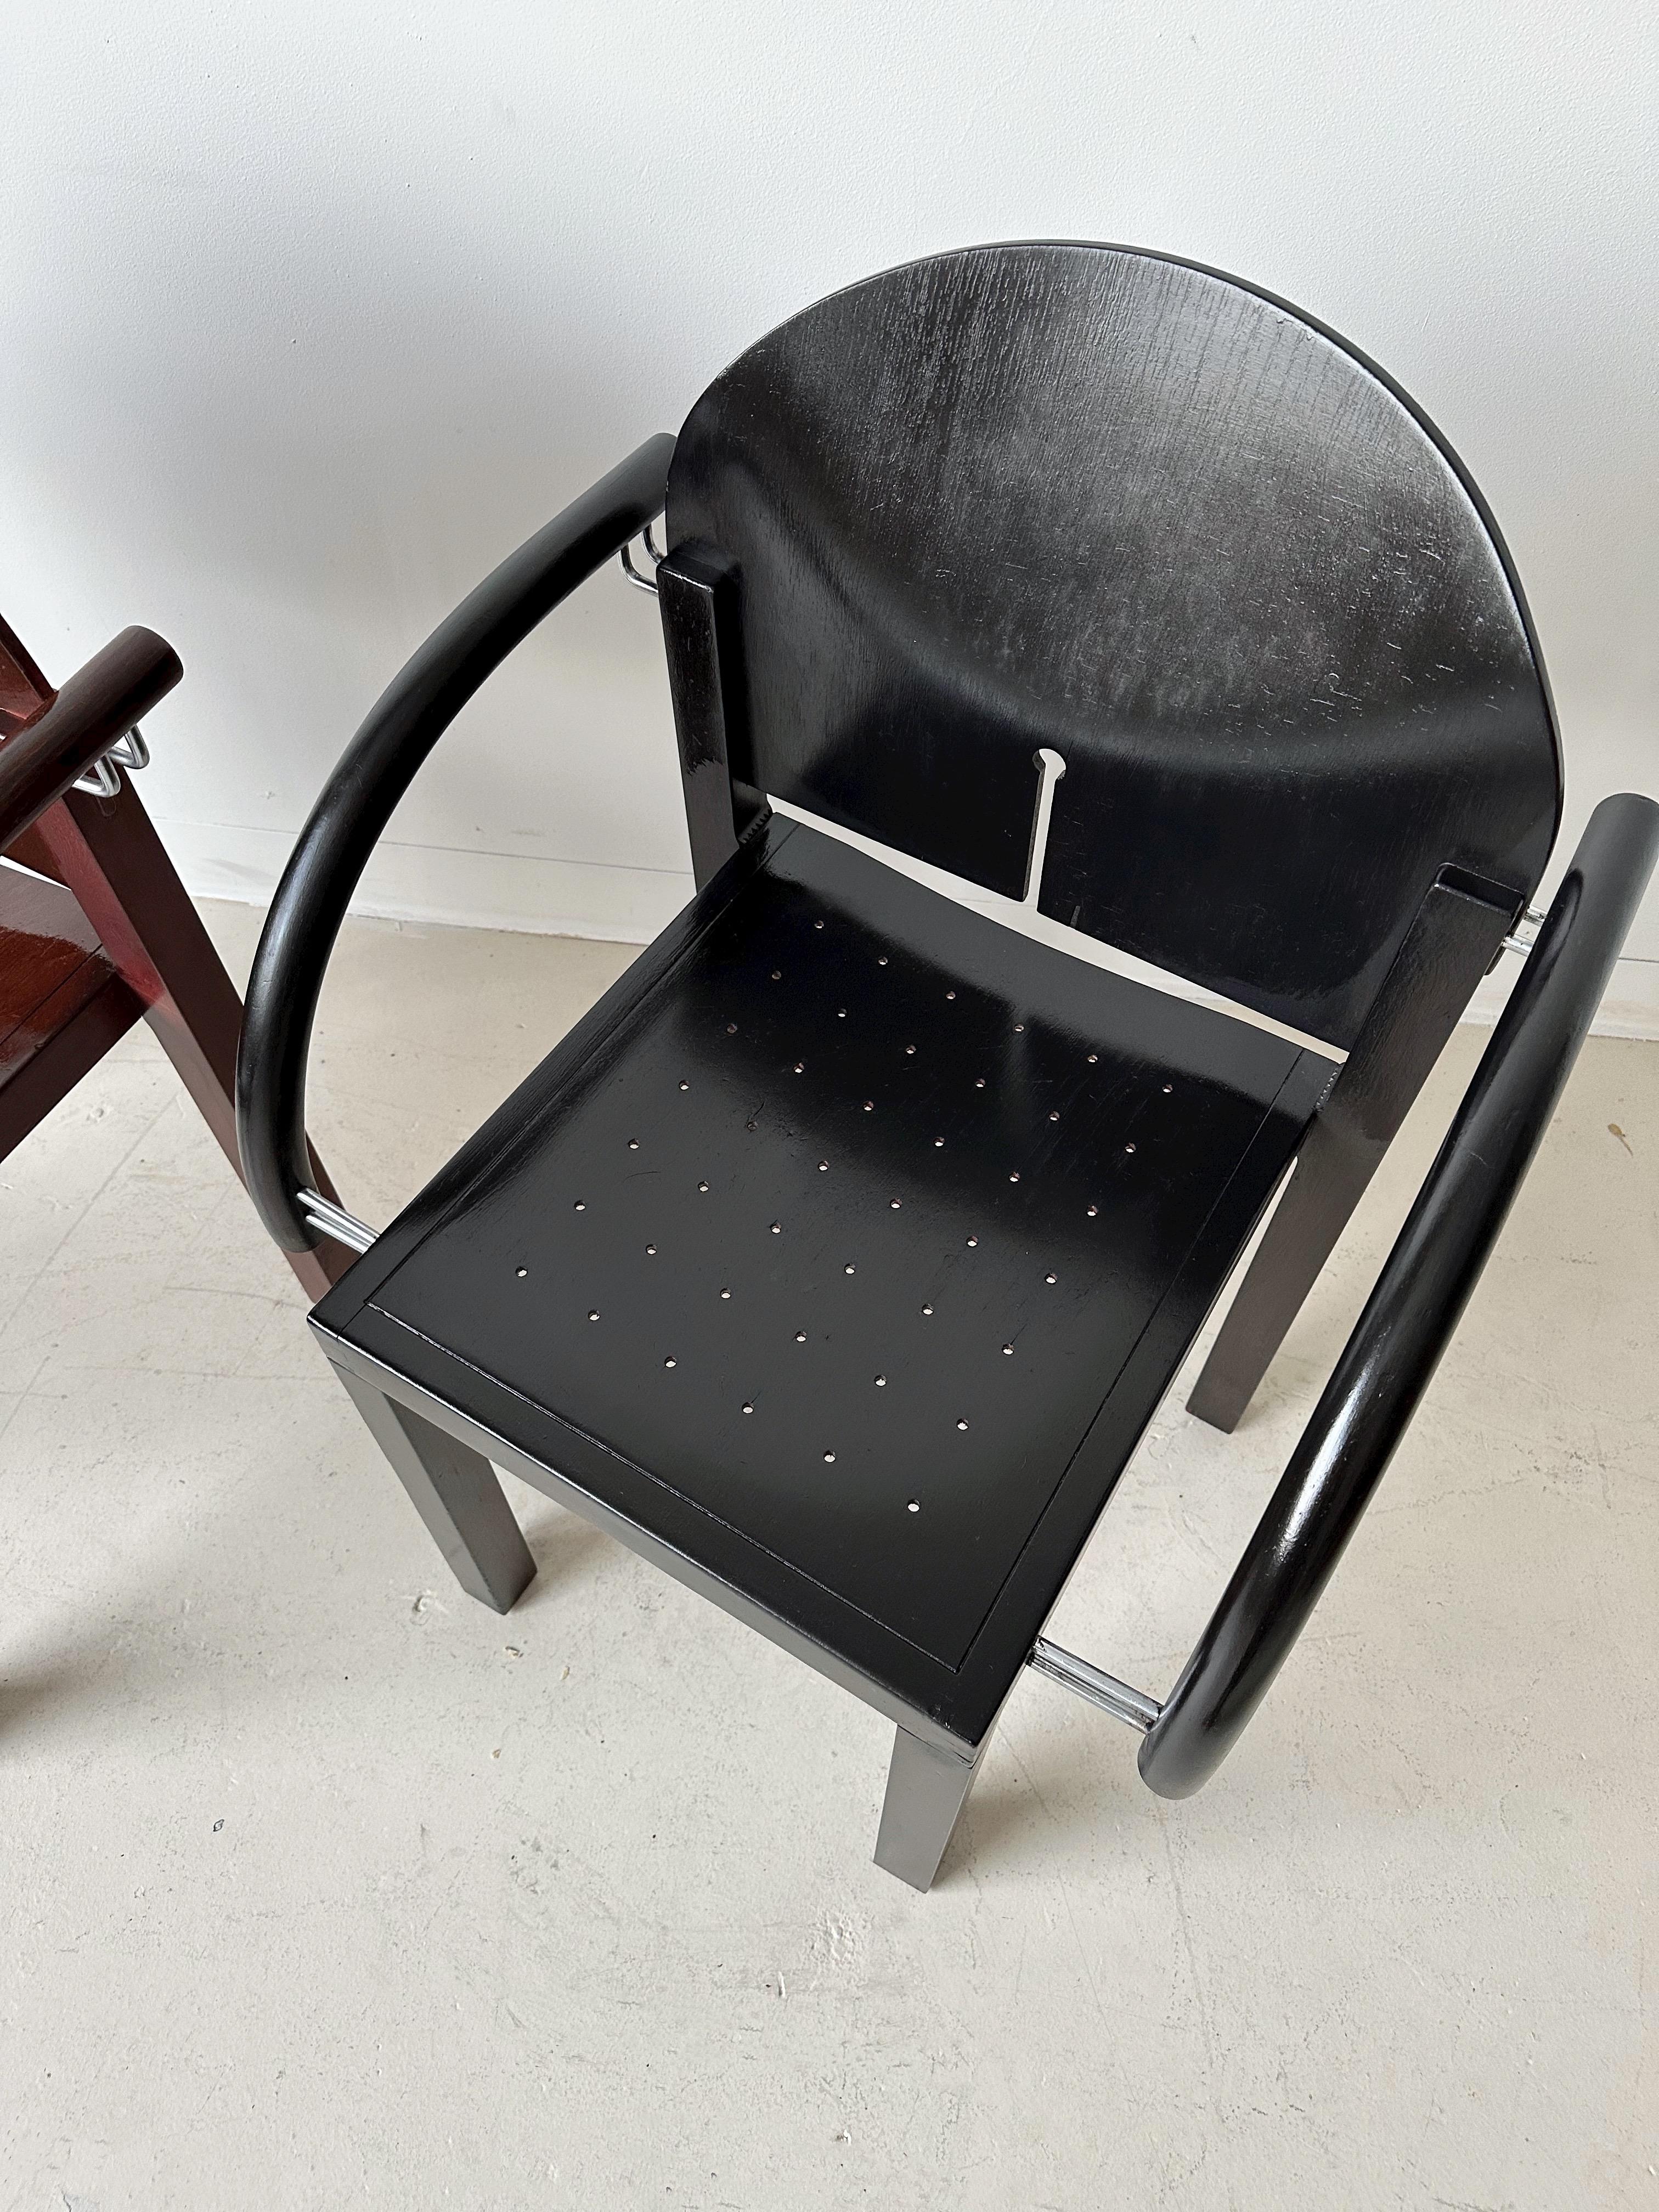 Black Stained Wood Side Chair Attributed to Arno Votteler Eclipse Chair for Knoll (there are no marks or stamps)

//

Dimensions:

23.5”W x 18”D x 33.5”H  - seat height 17.5